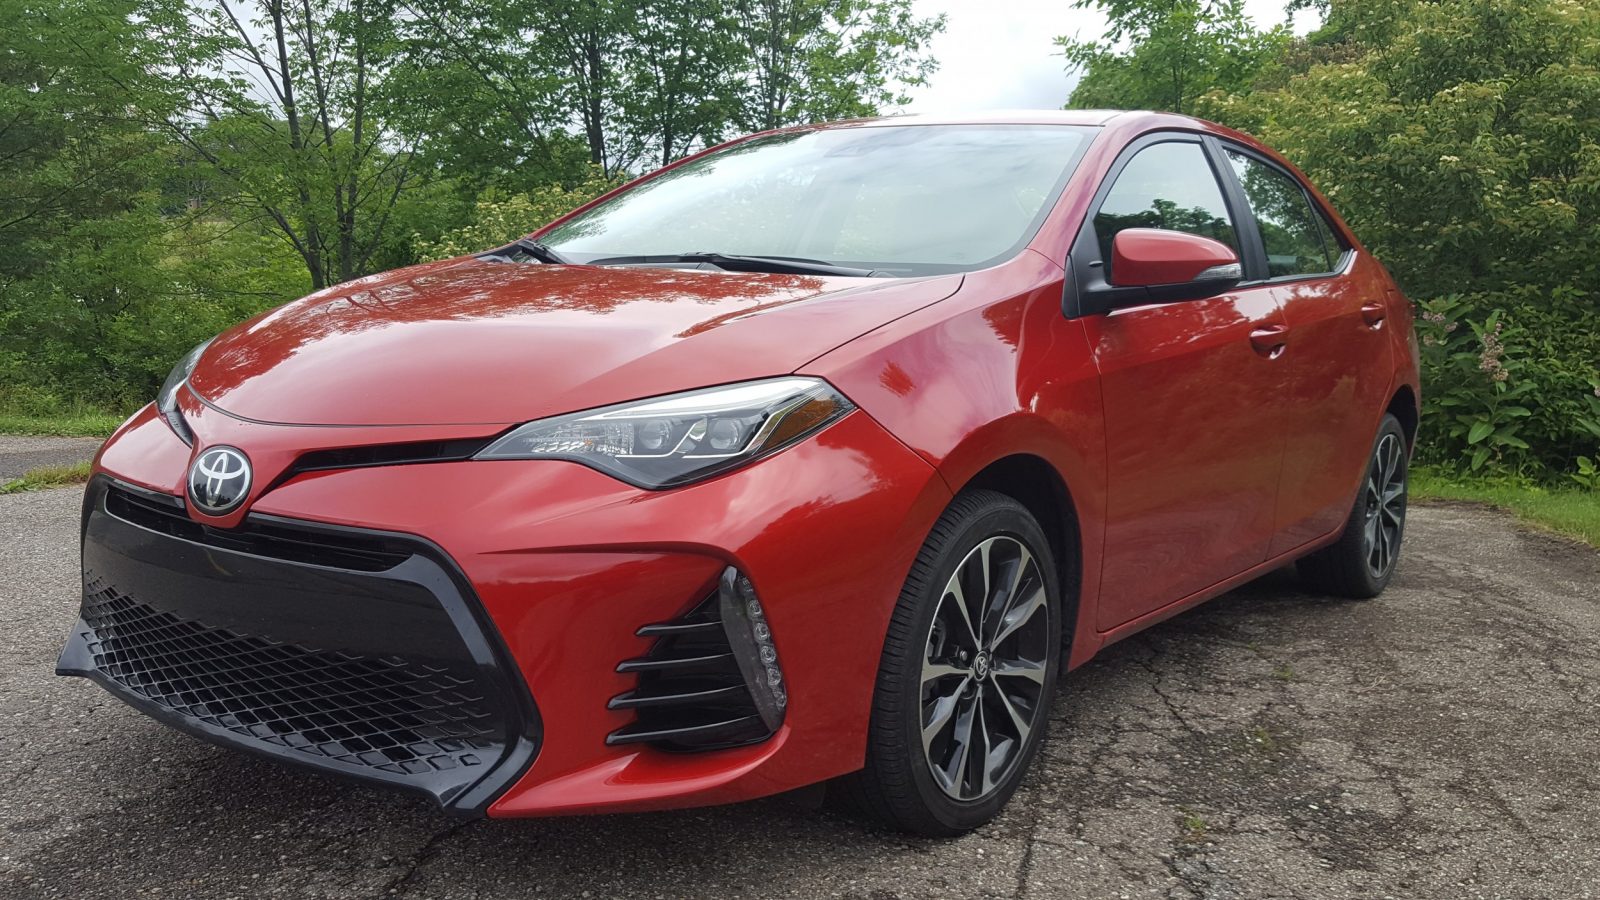 Road Test Review - 2018 Toyota Corolla SE - By Carl Malek » LATEST NEWS